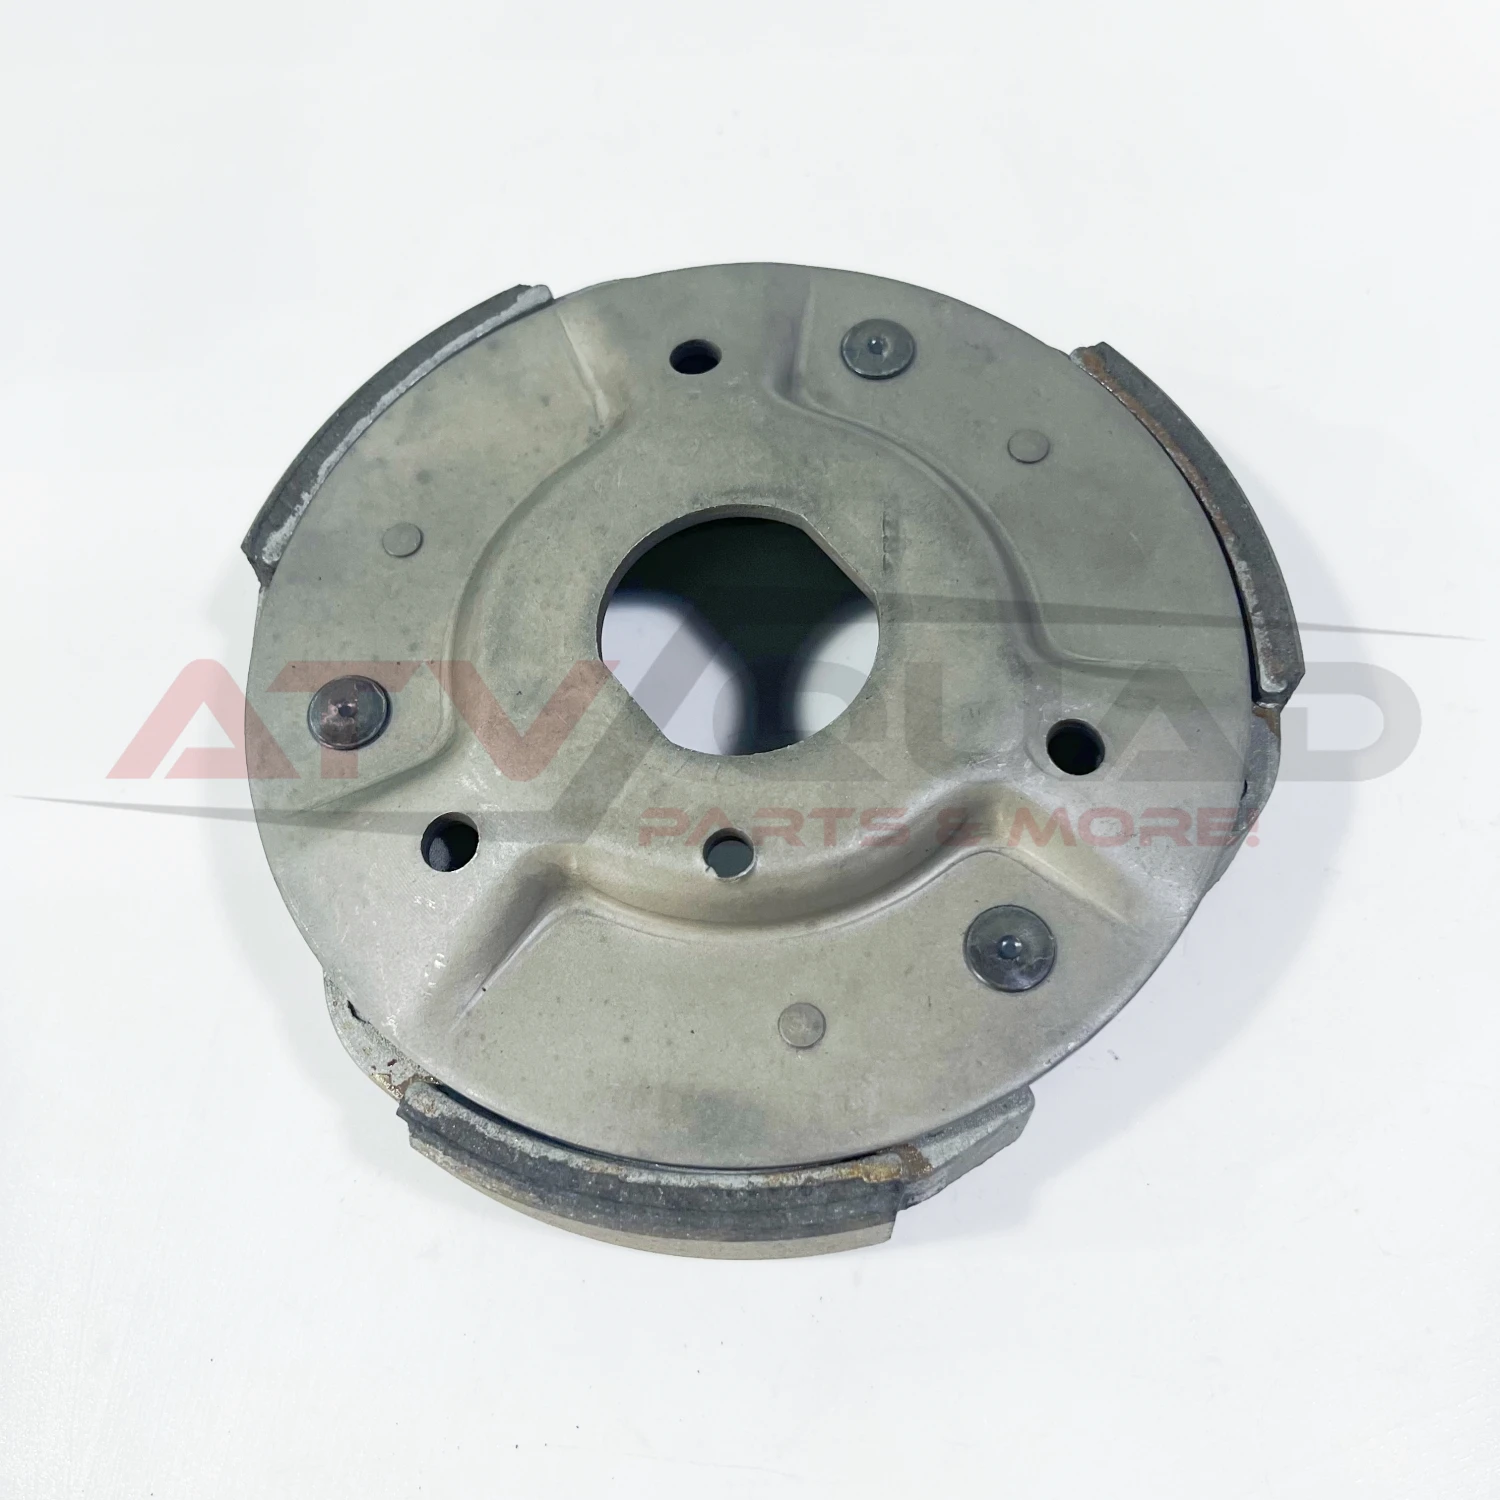 149MM Clutch Plate Shoe Clutch Carrier Assy for Stels ATV 300B Buyang 300 Feishen FA-D300 G300 2.3.10.1240 LU001240 t 050 fullmusic 300b c 300bc vacuum tube carbon plate replace eh jj 300b tubes factory match